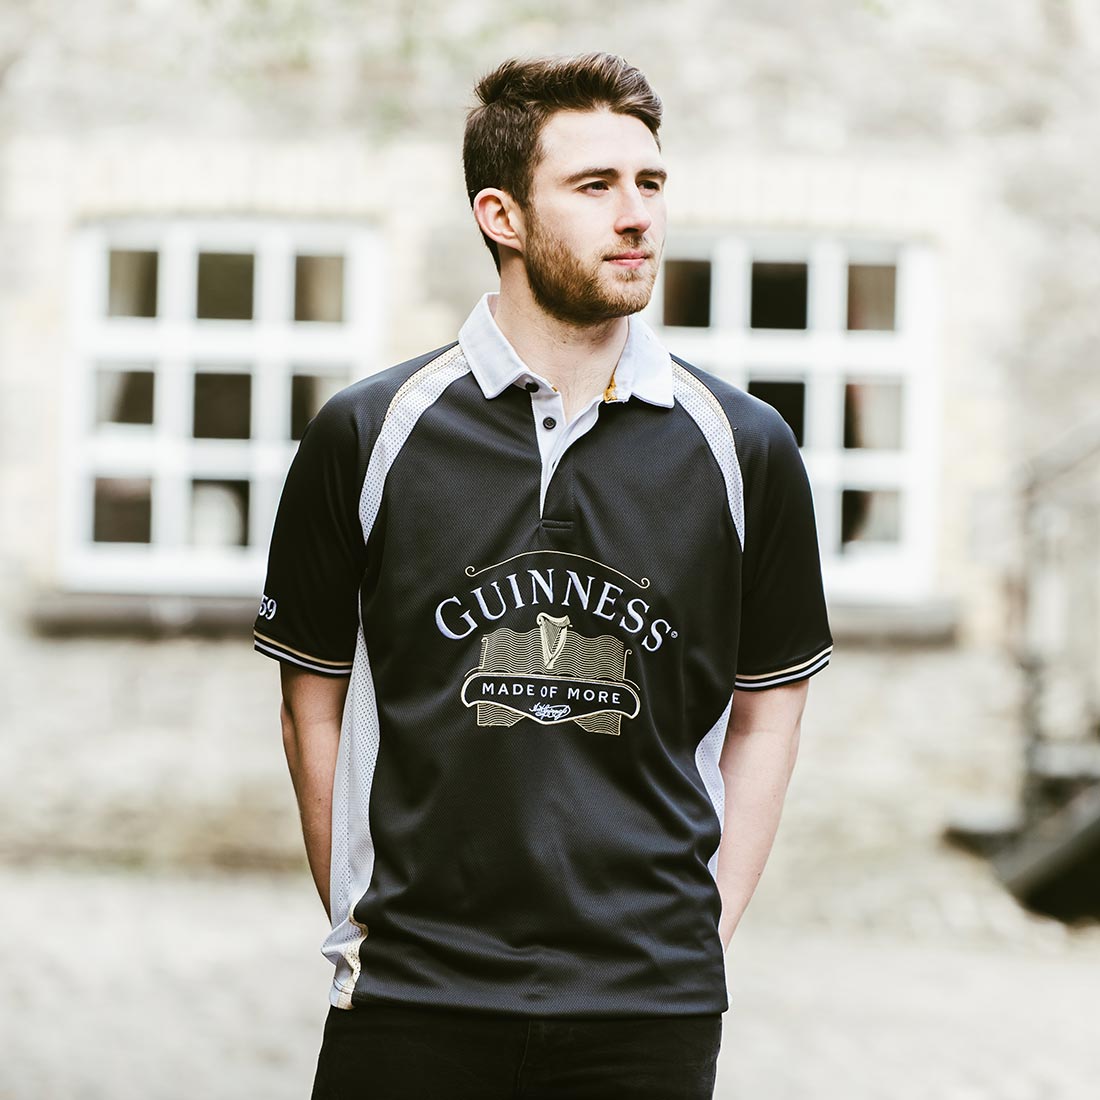 Experience the ultimate Made of More Rugby Jersey by Guinness, featuring moisture-wicking performance fabric and iconic Guinness branding. This premium rugby jersey is a must-have for any true fan of the sport.